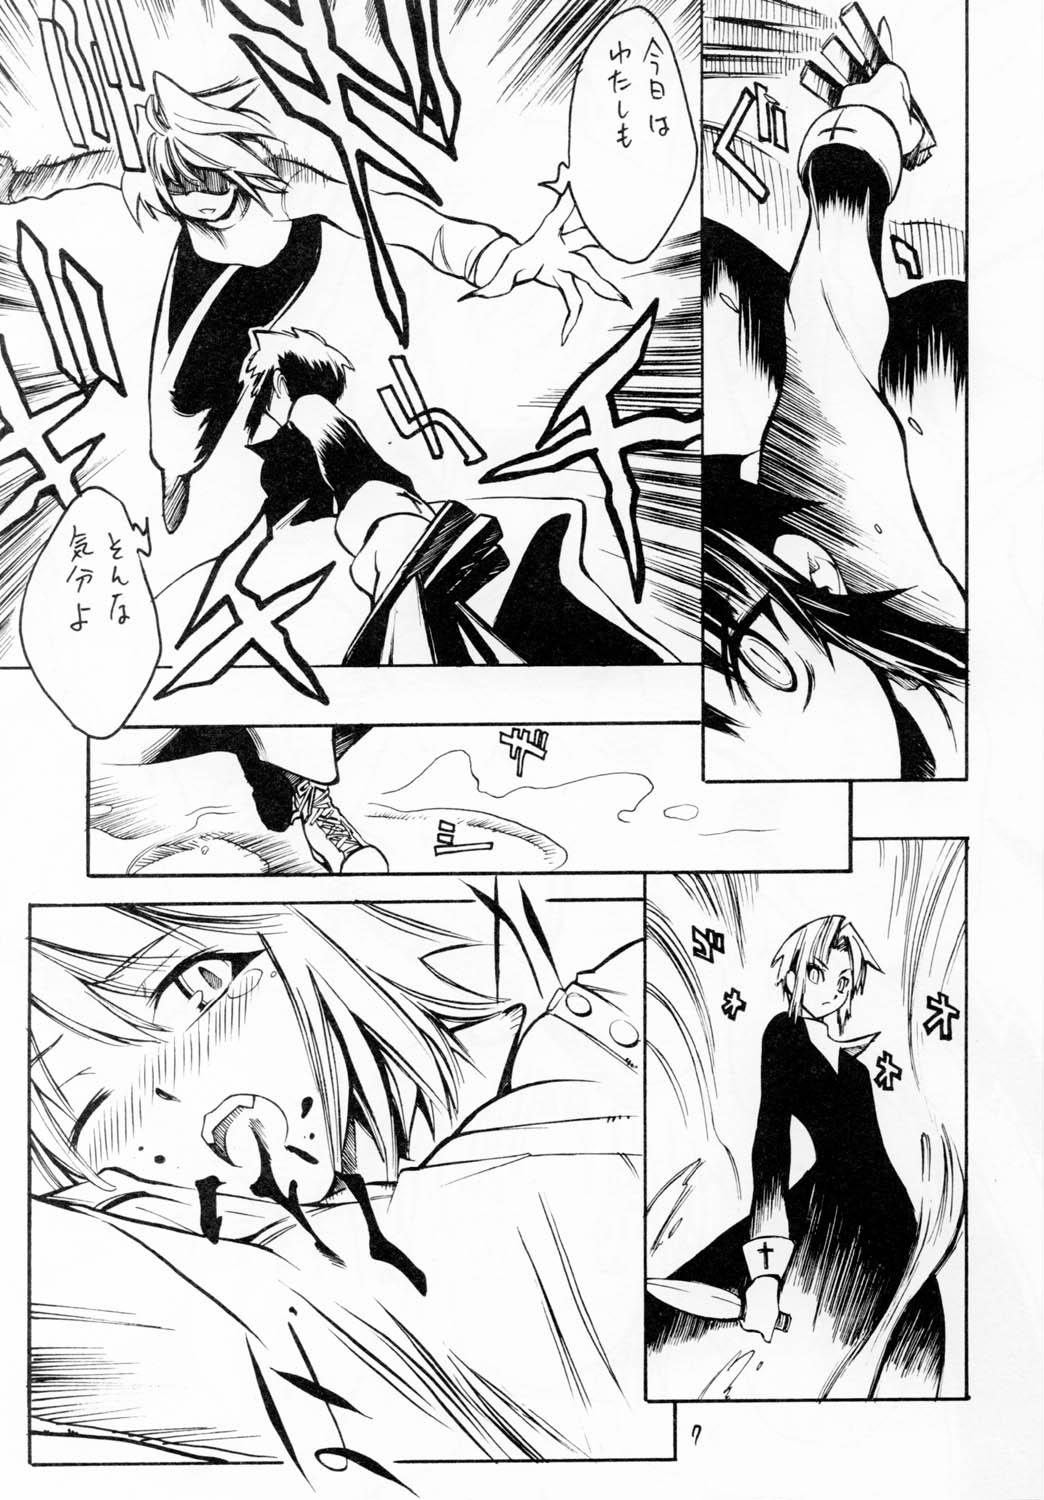 Argenta WHITE FANG - Tsukihime Sister - Page 6